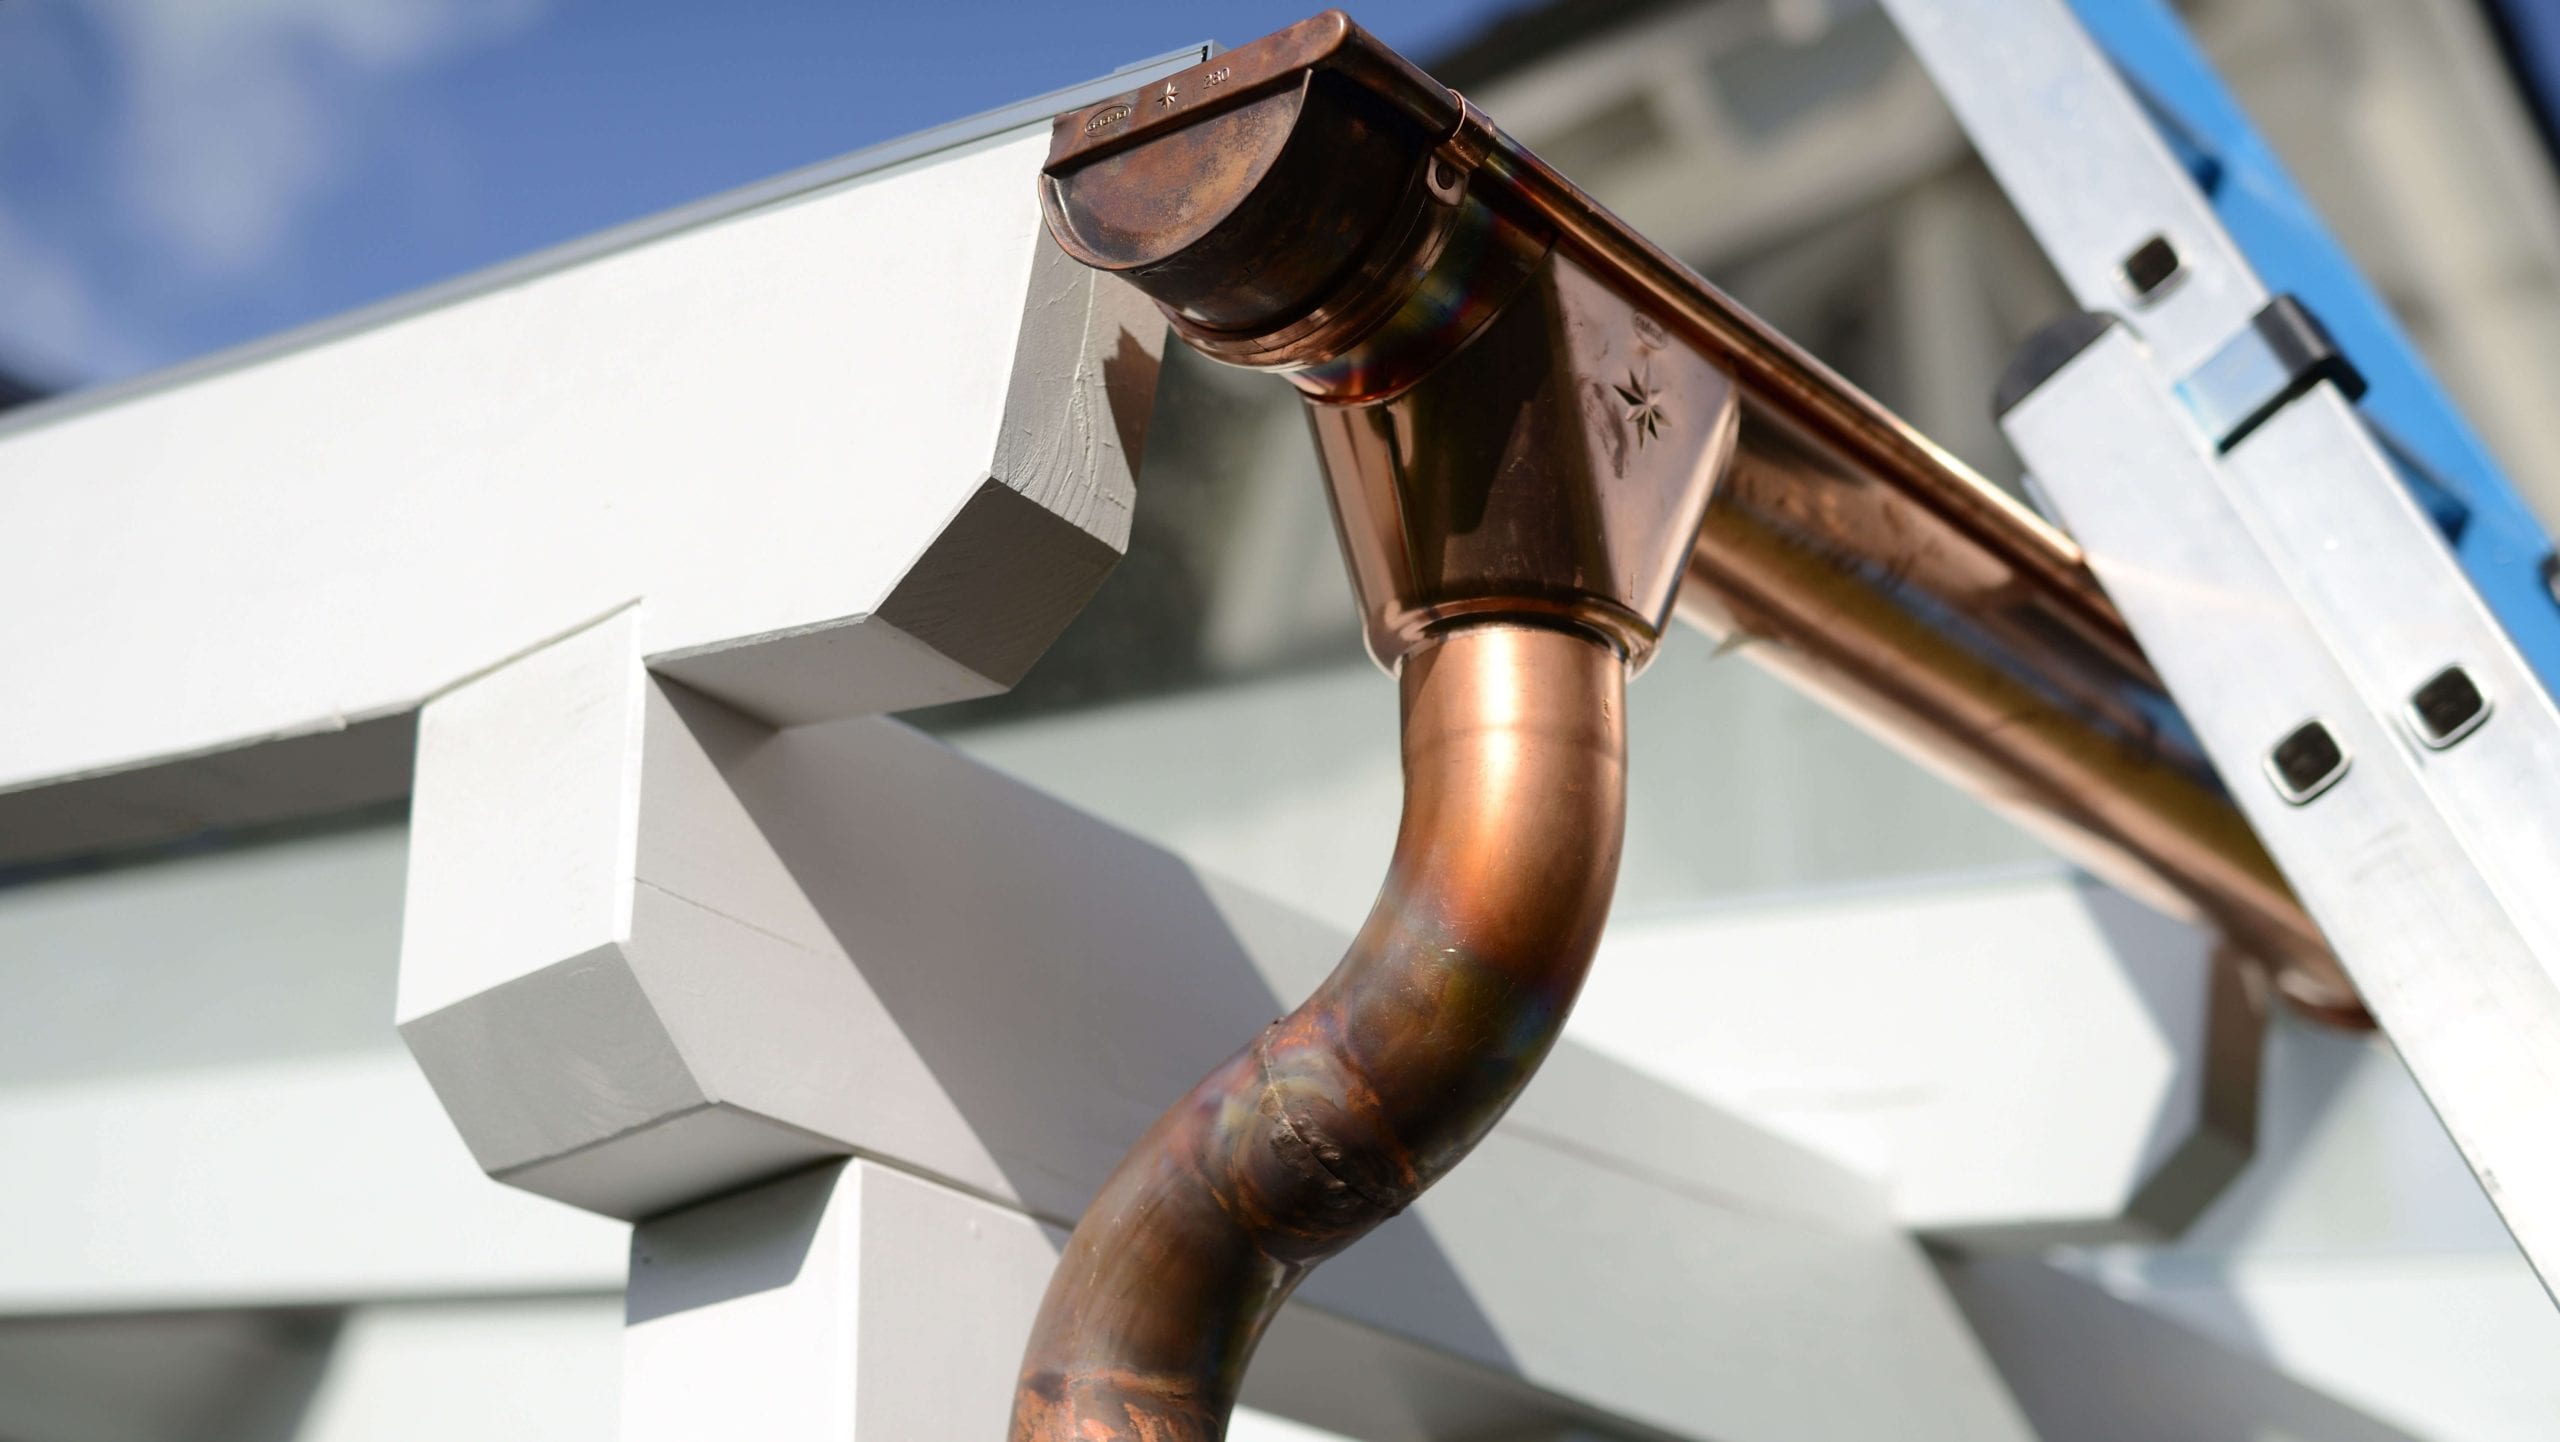 Make your property stand out with copper gutters. Contact for gutter installation in Carrollton